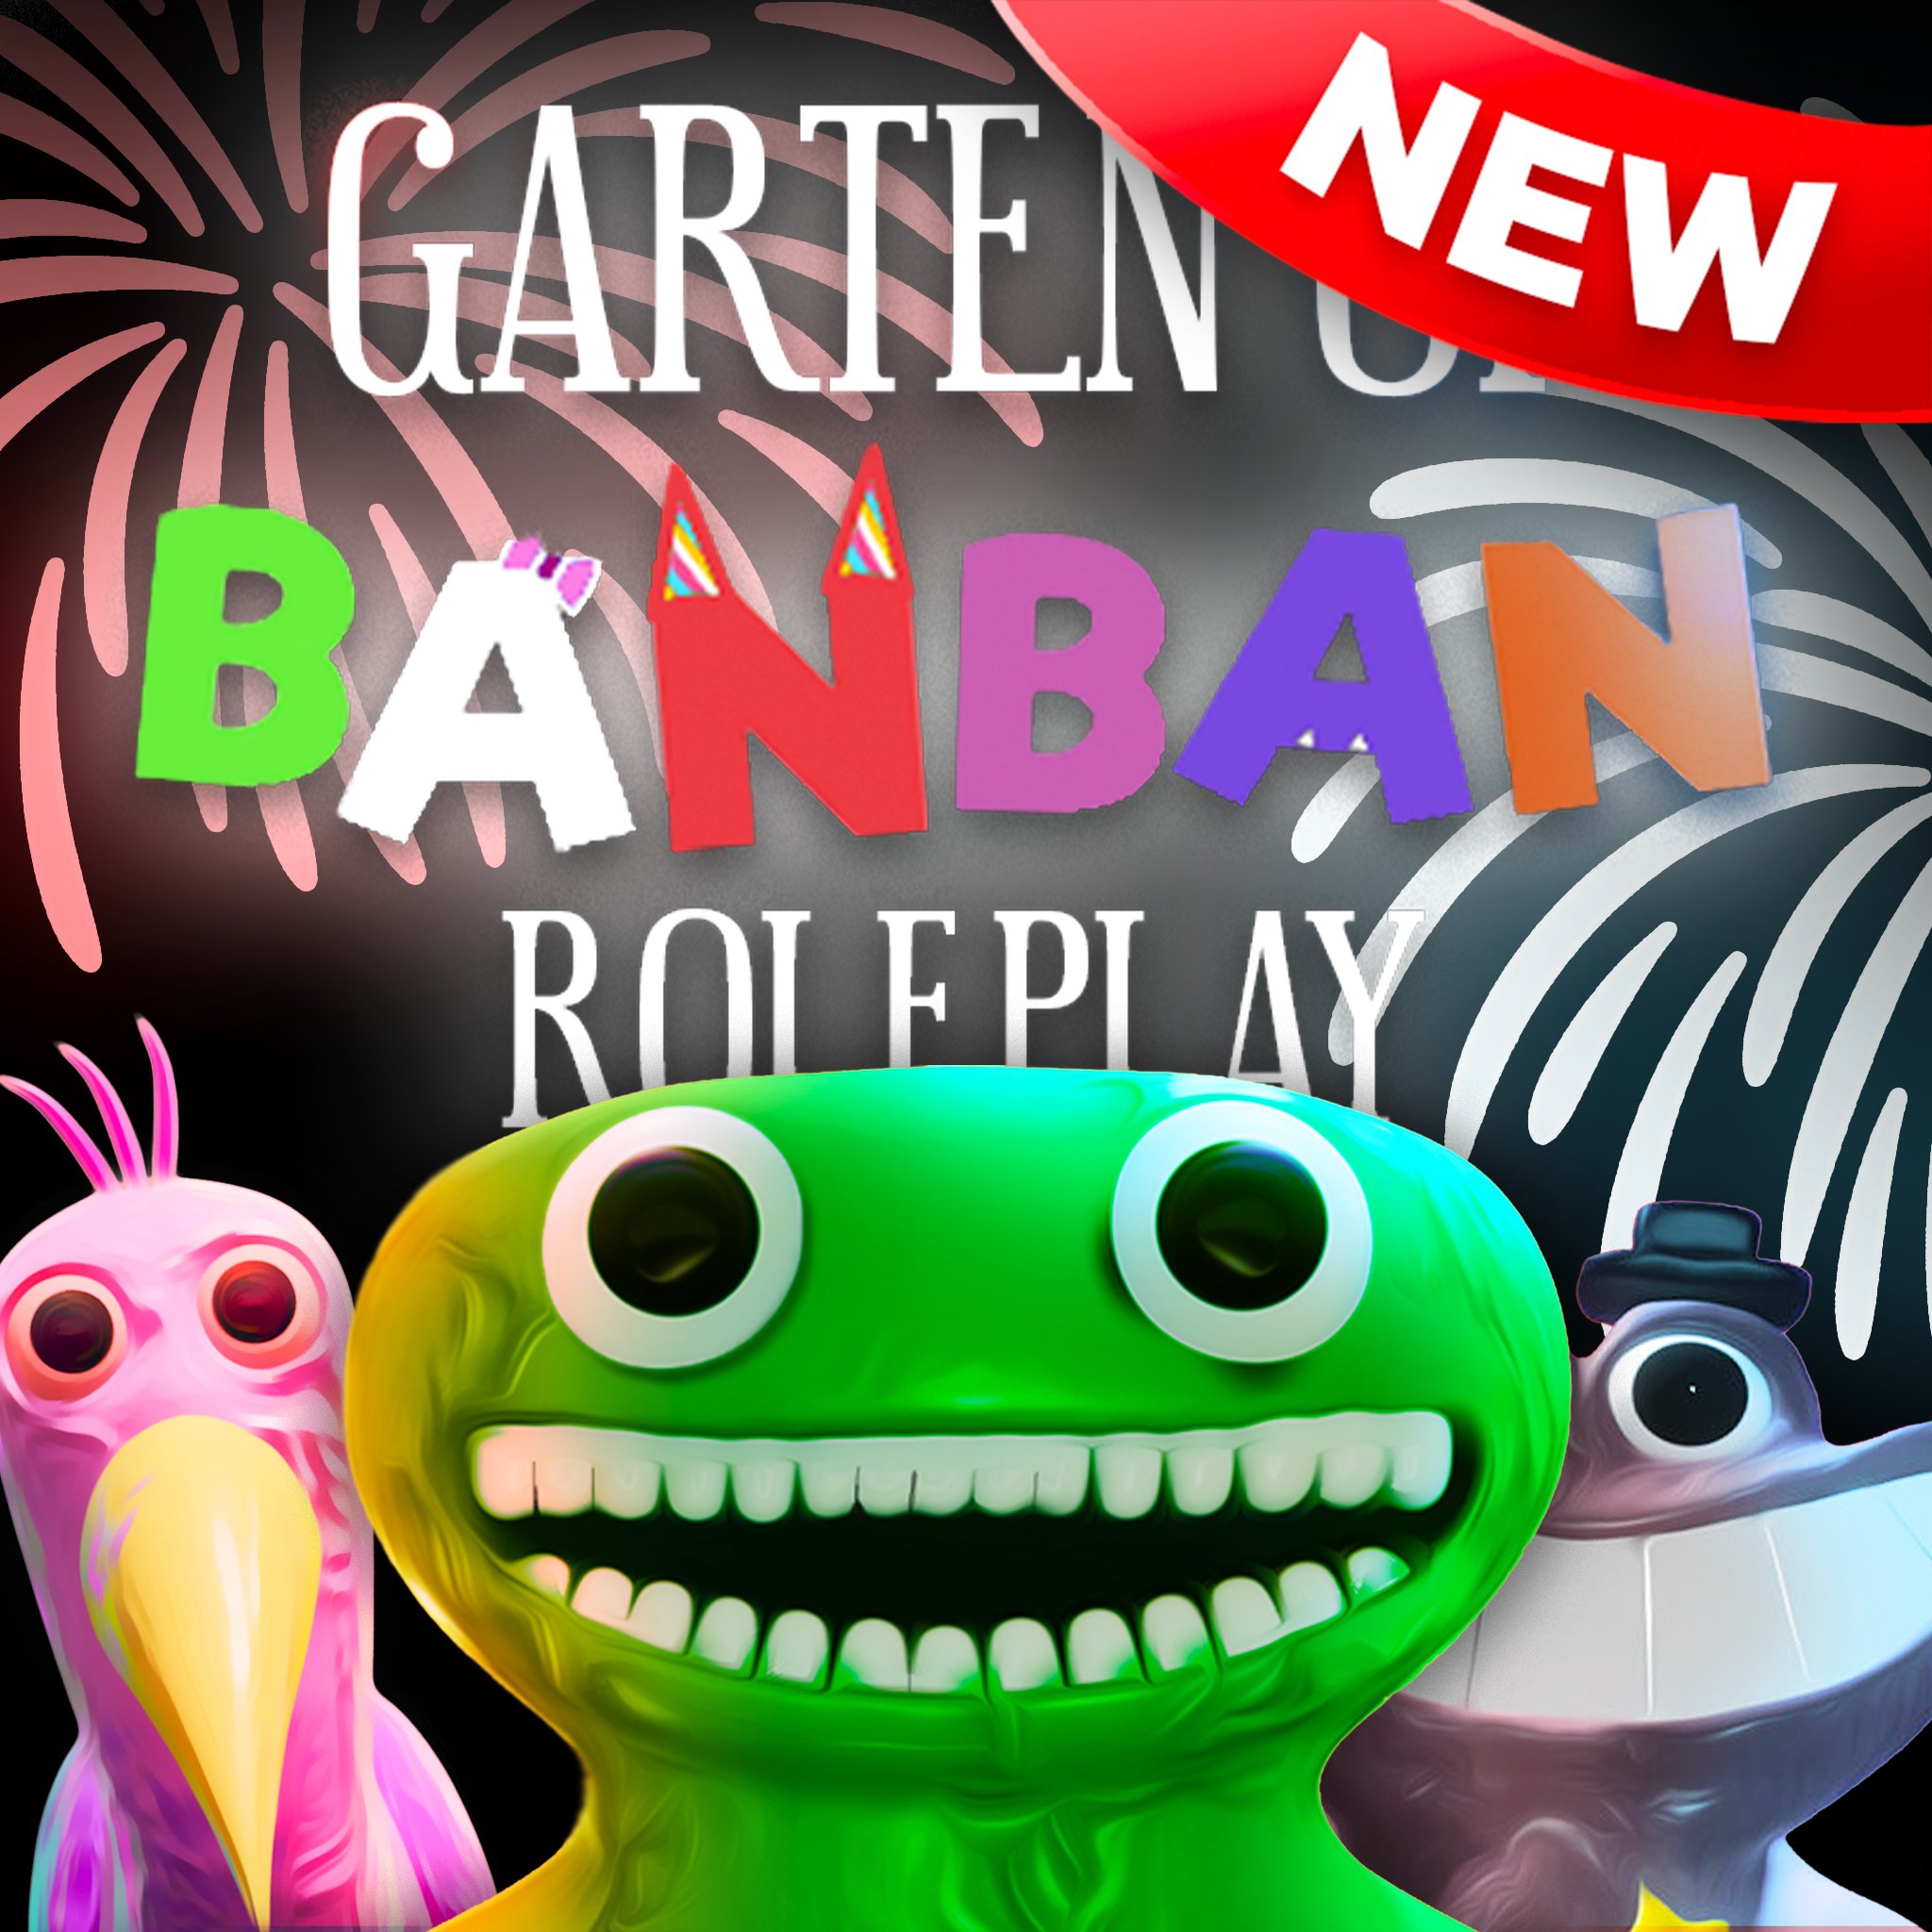 Garten of Banban - PCGamingWiki PCGW - bugs, fixes, crashes, mods, guides  and improvements for every PC game